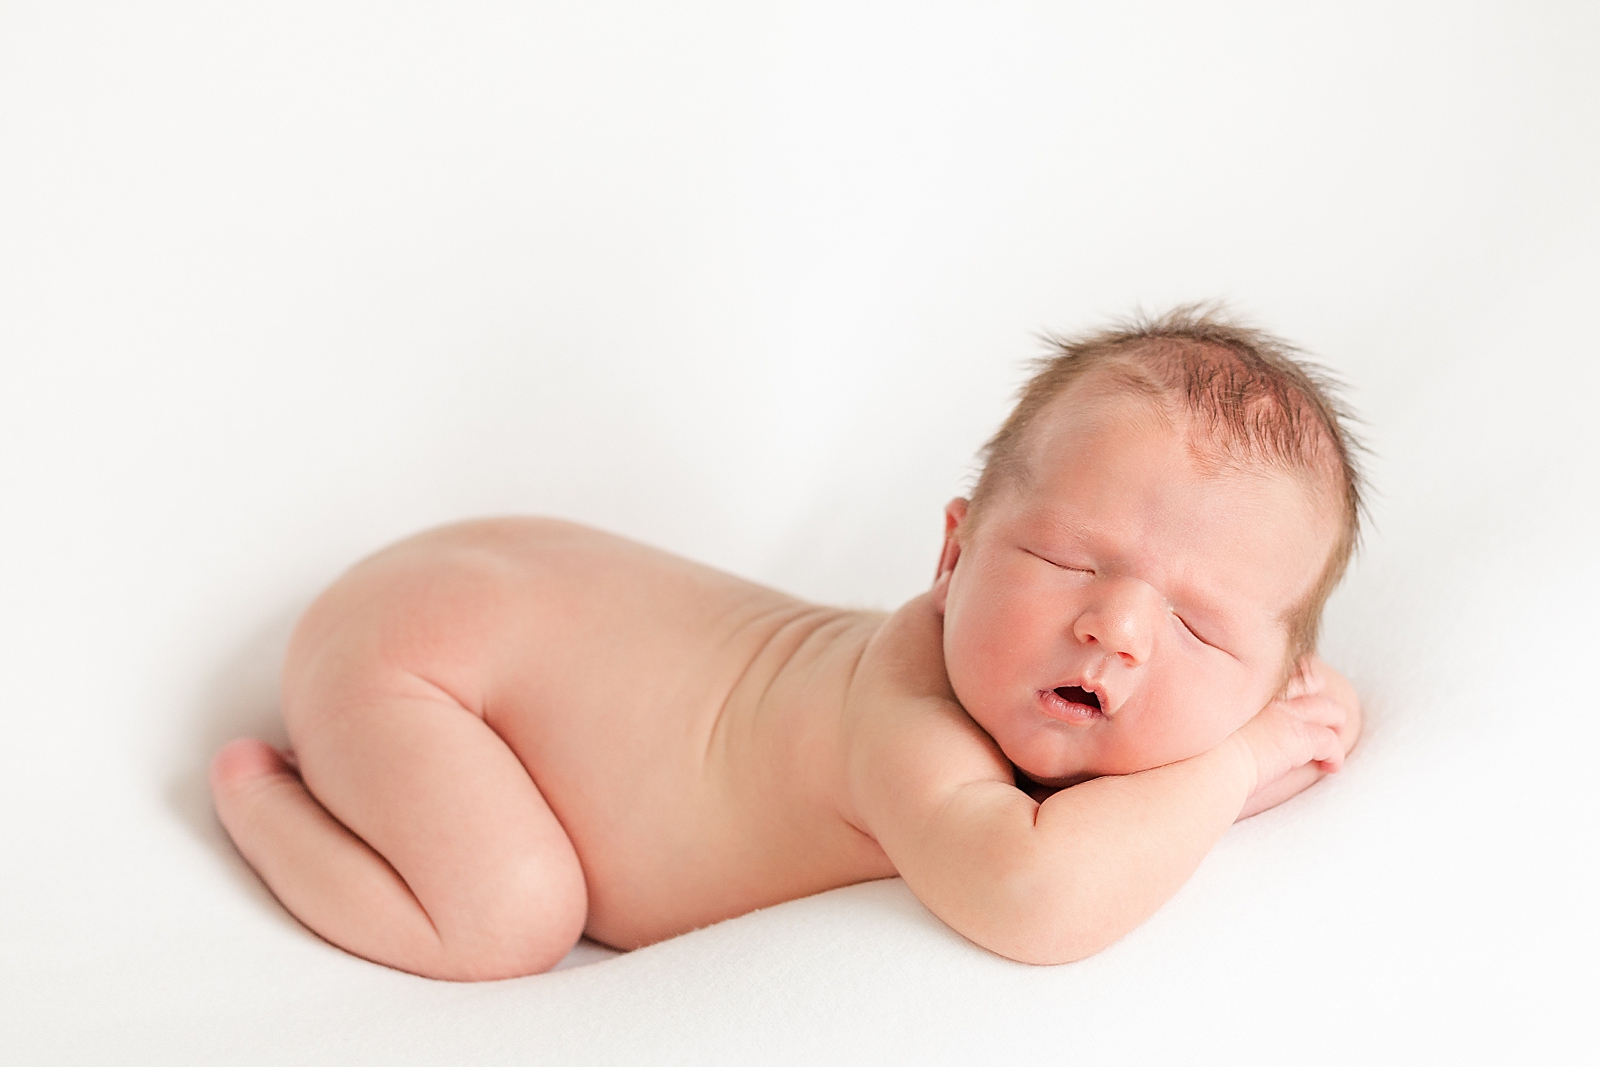 Posed newborn photo of sleeping baby on tummy with face resting on arms naked